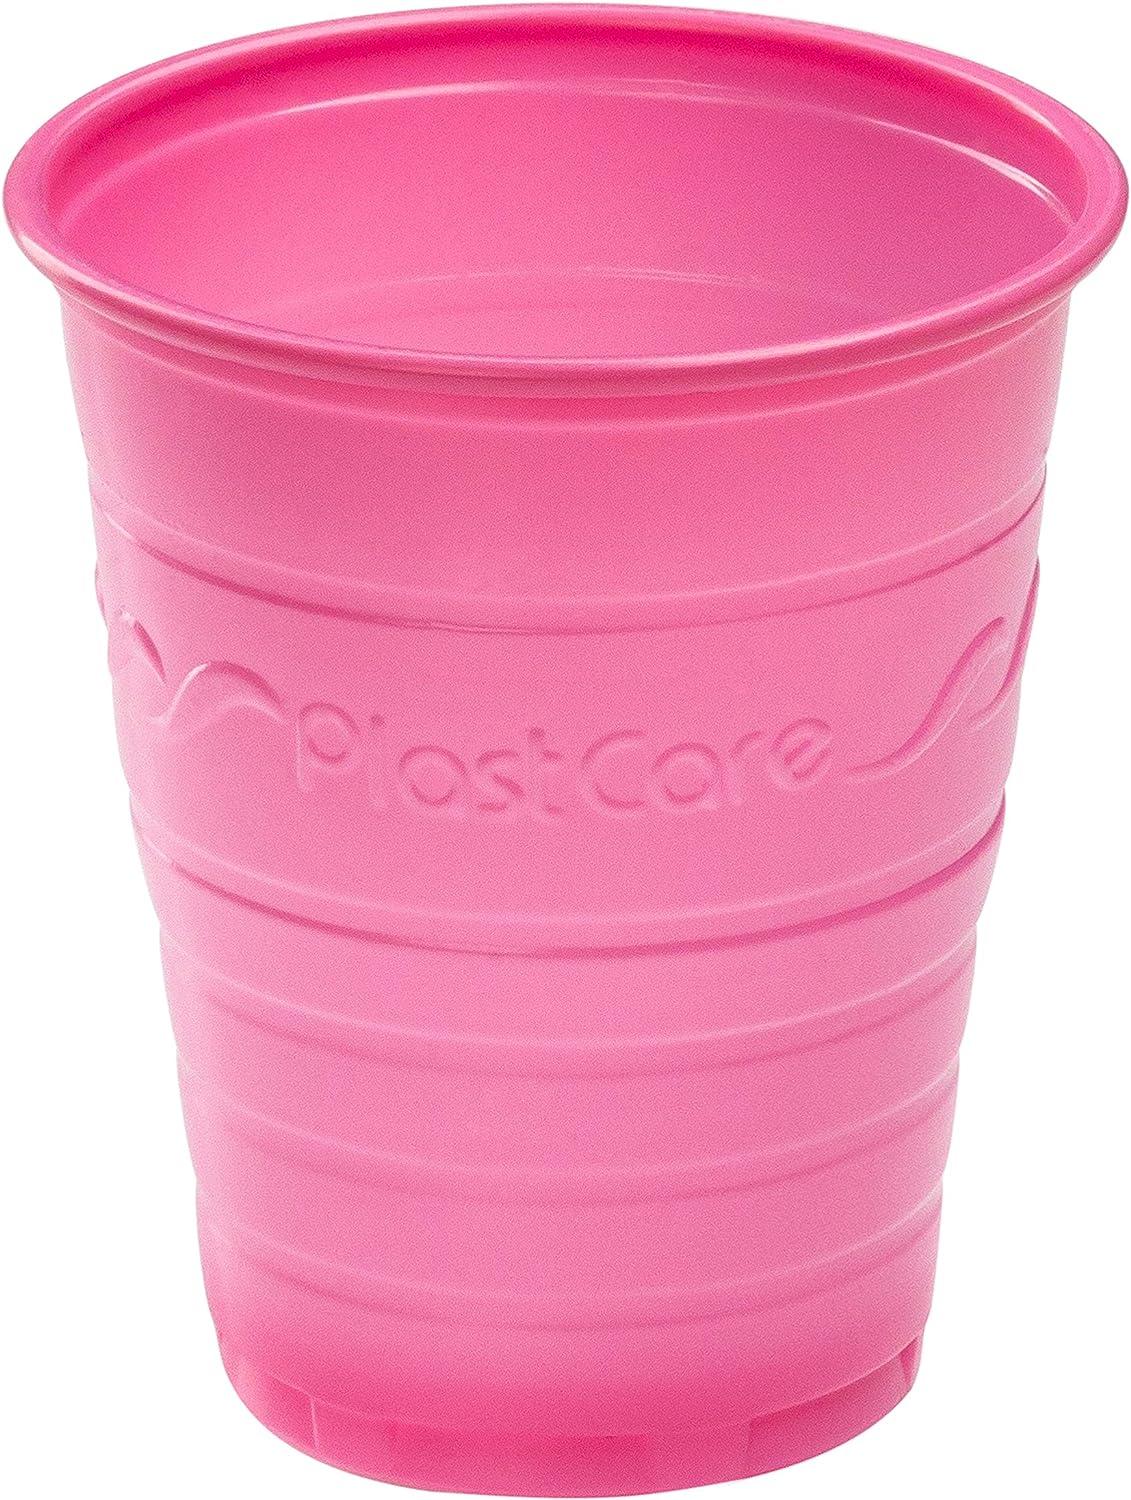 200 Disposable 5 Ounce Plastic Cups for Drinking Rinse Mouthwash for Dental  Ribbed Design (Pink)